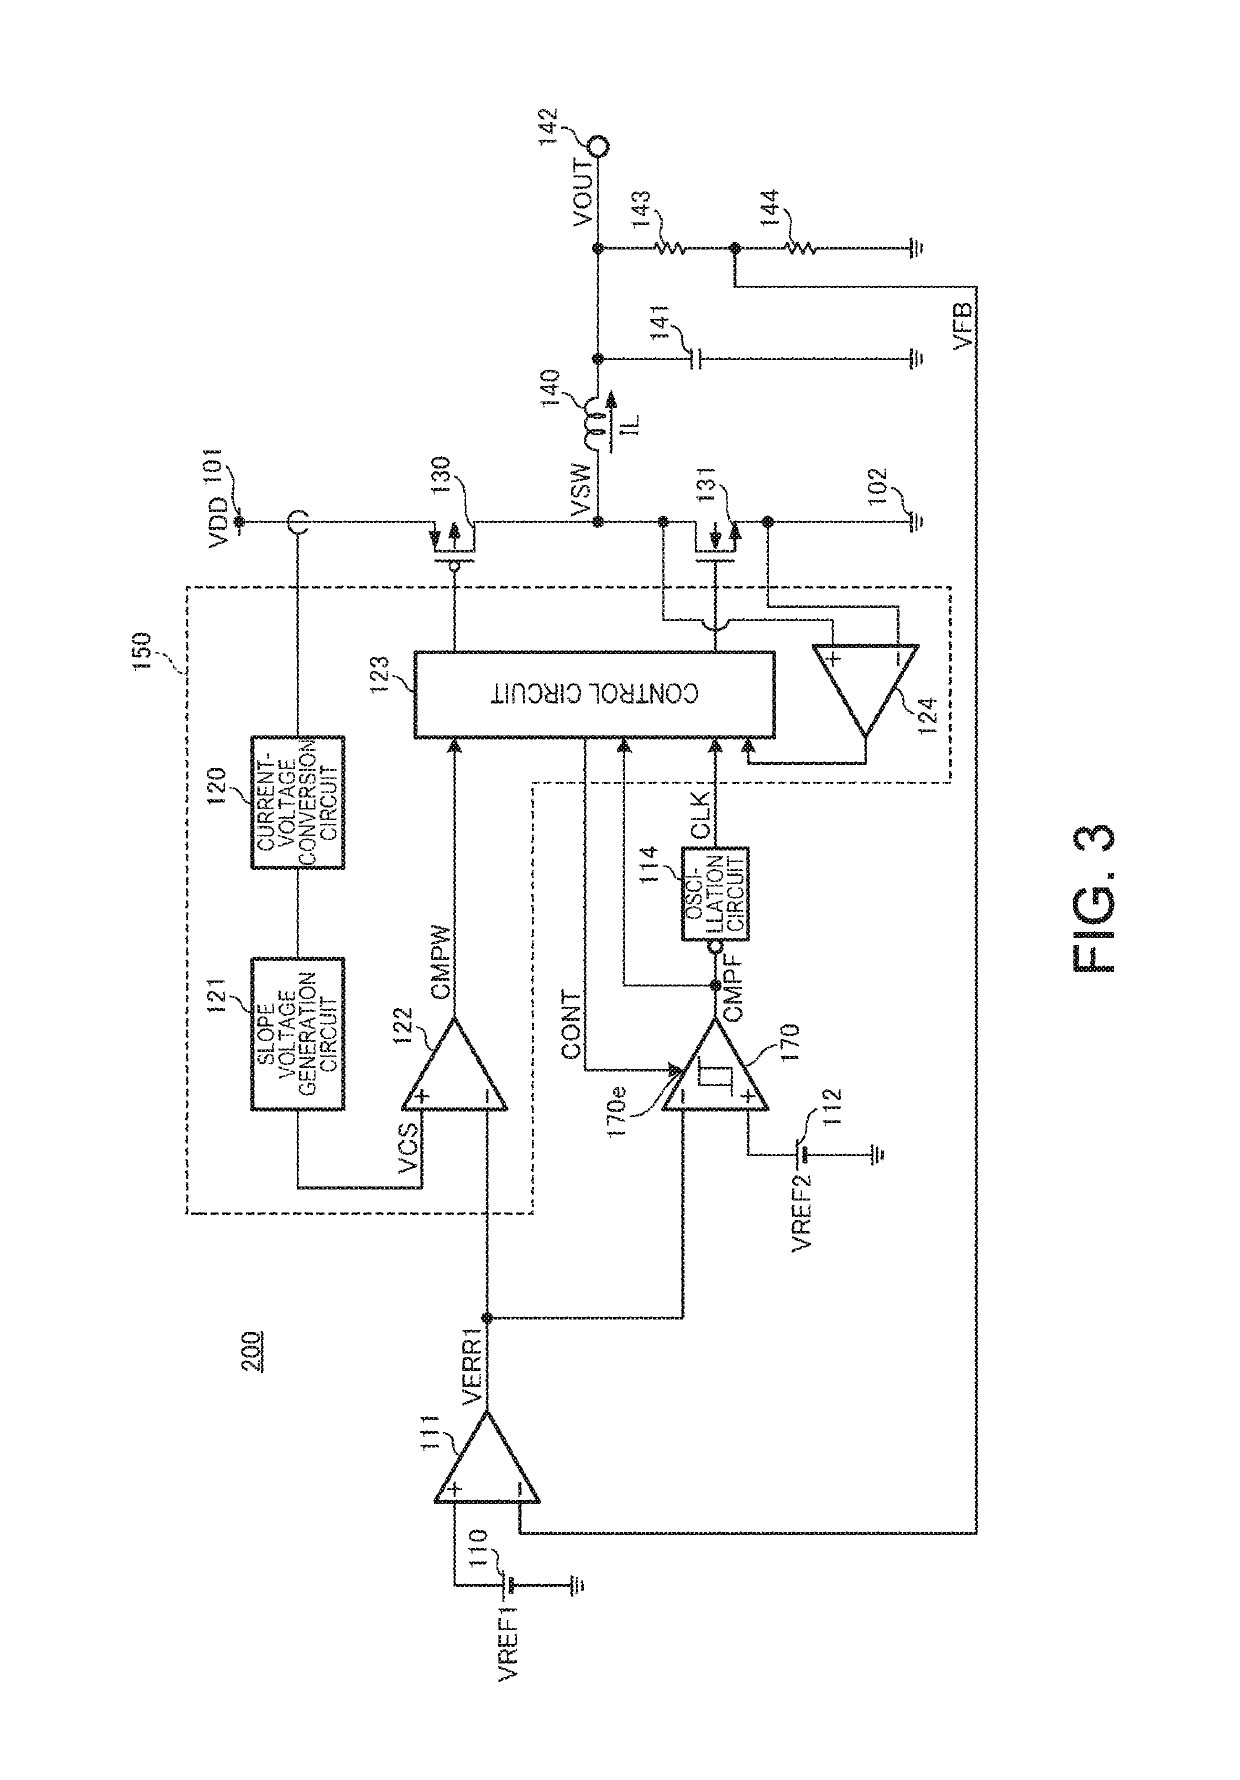 Switching regulator including an offset enabled comparison circuit